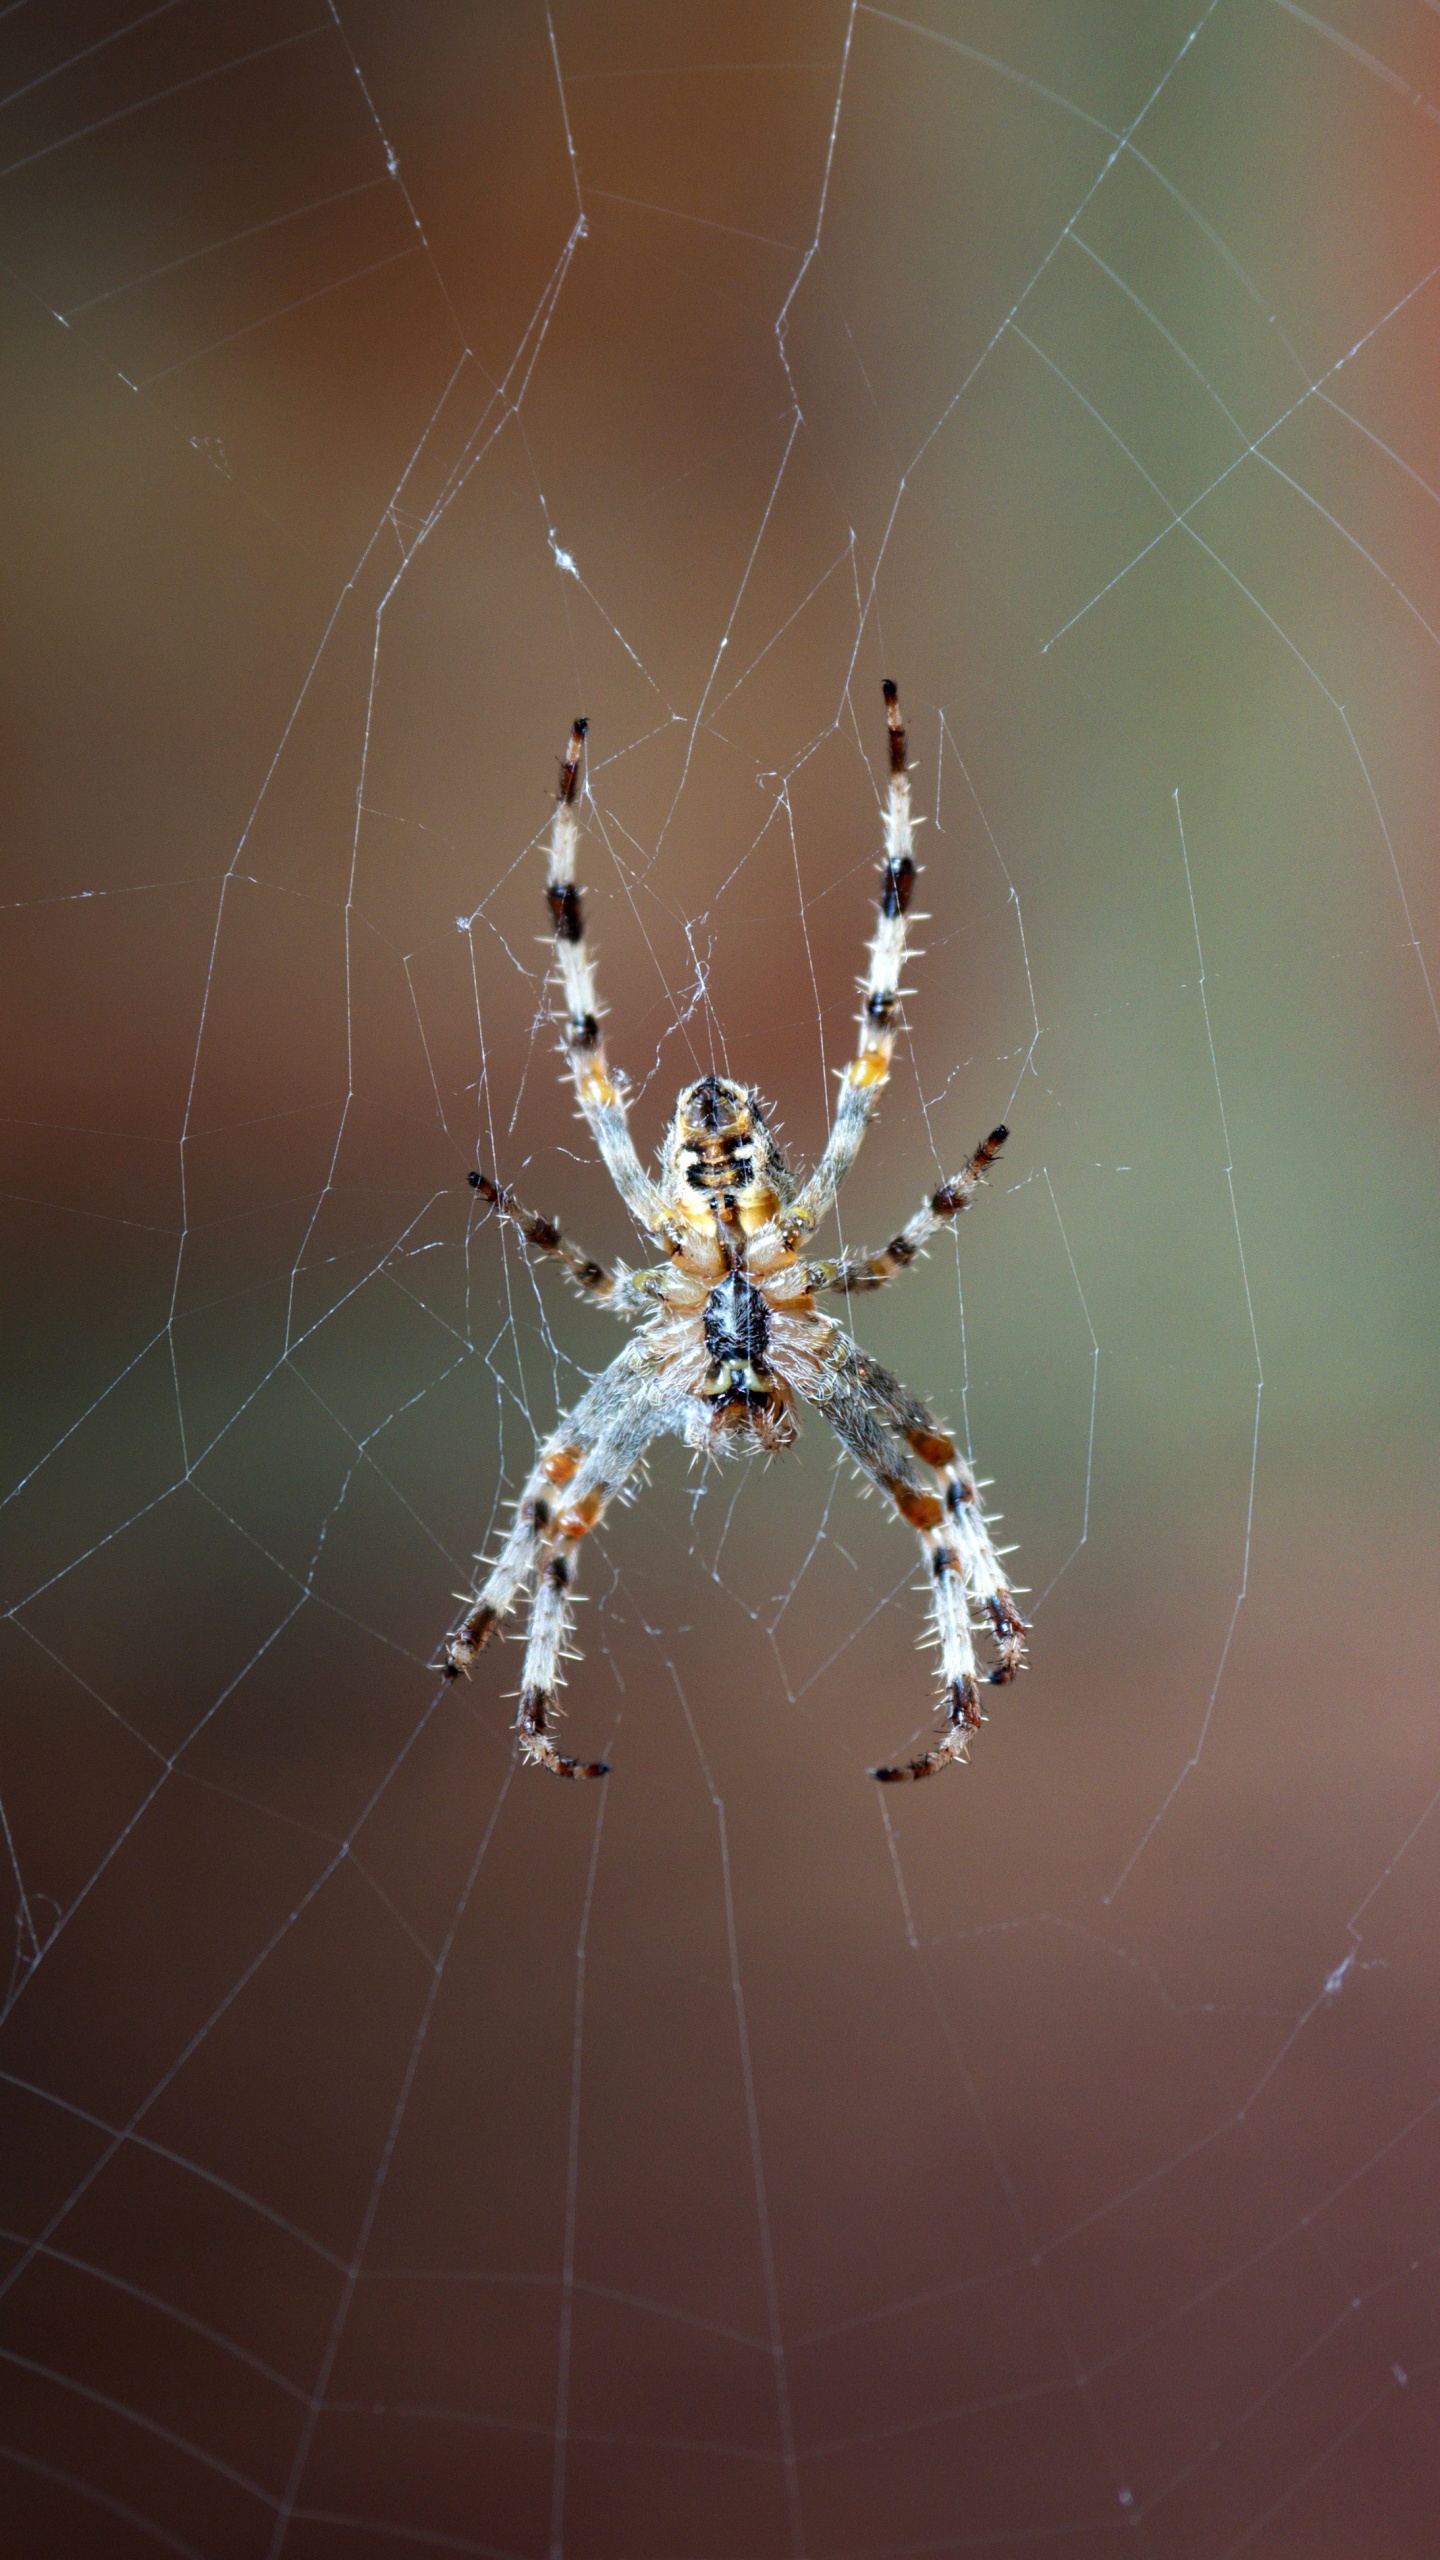 Brown and Black Spider on Web in Close up Photography During Daytime. Wallpaper in 1440x2560 Resolution